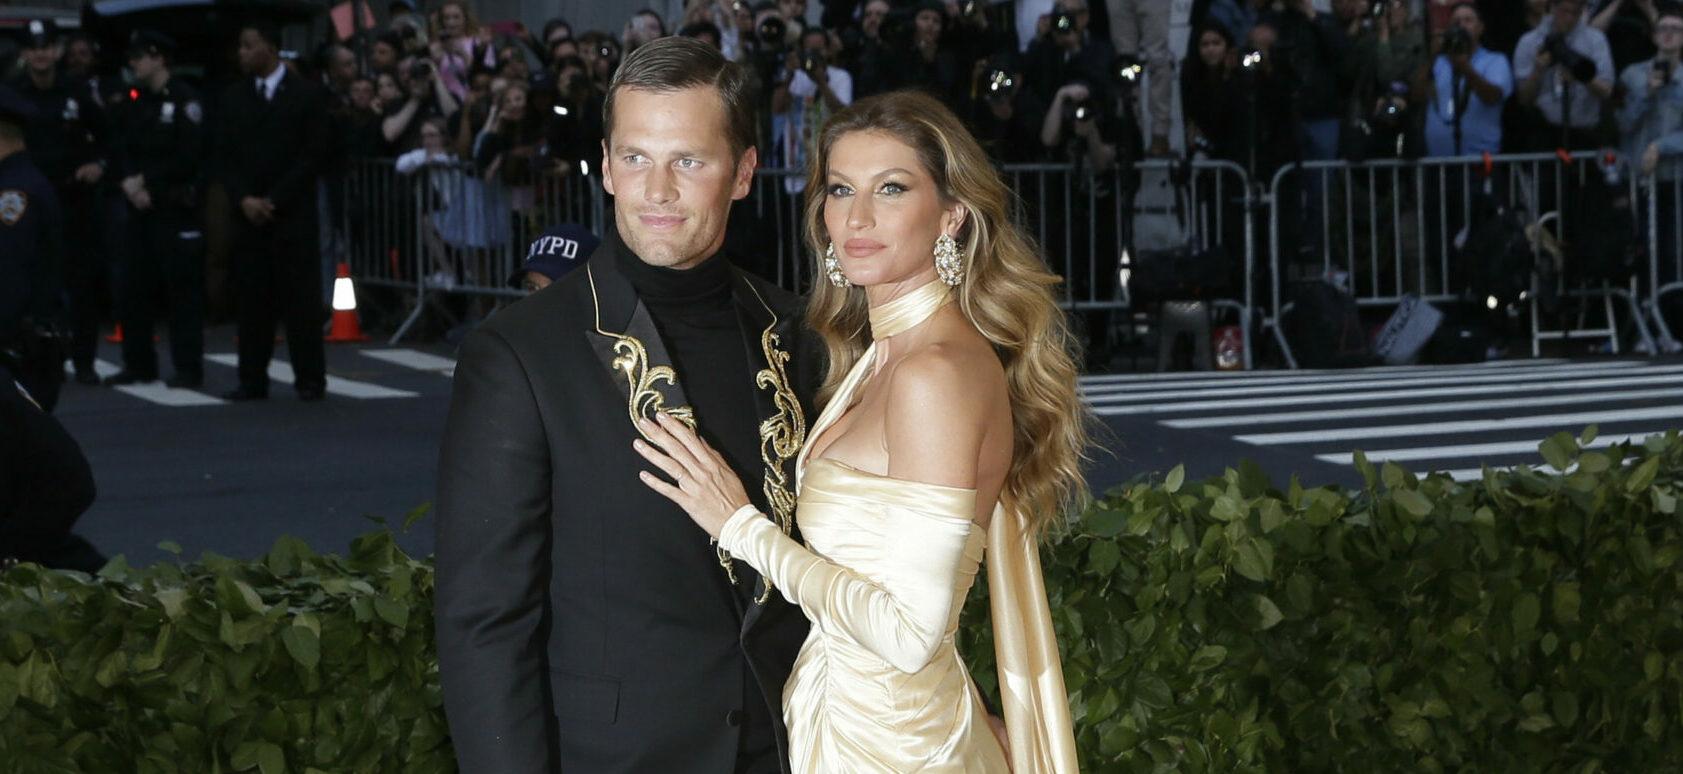 Gisele Bündchen Wouldn’t Change Getting Divorced From Tom Brady: ‘When A Door Shuts, Others Open’